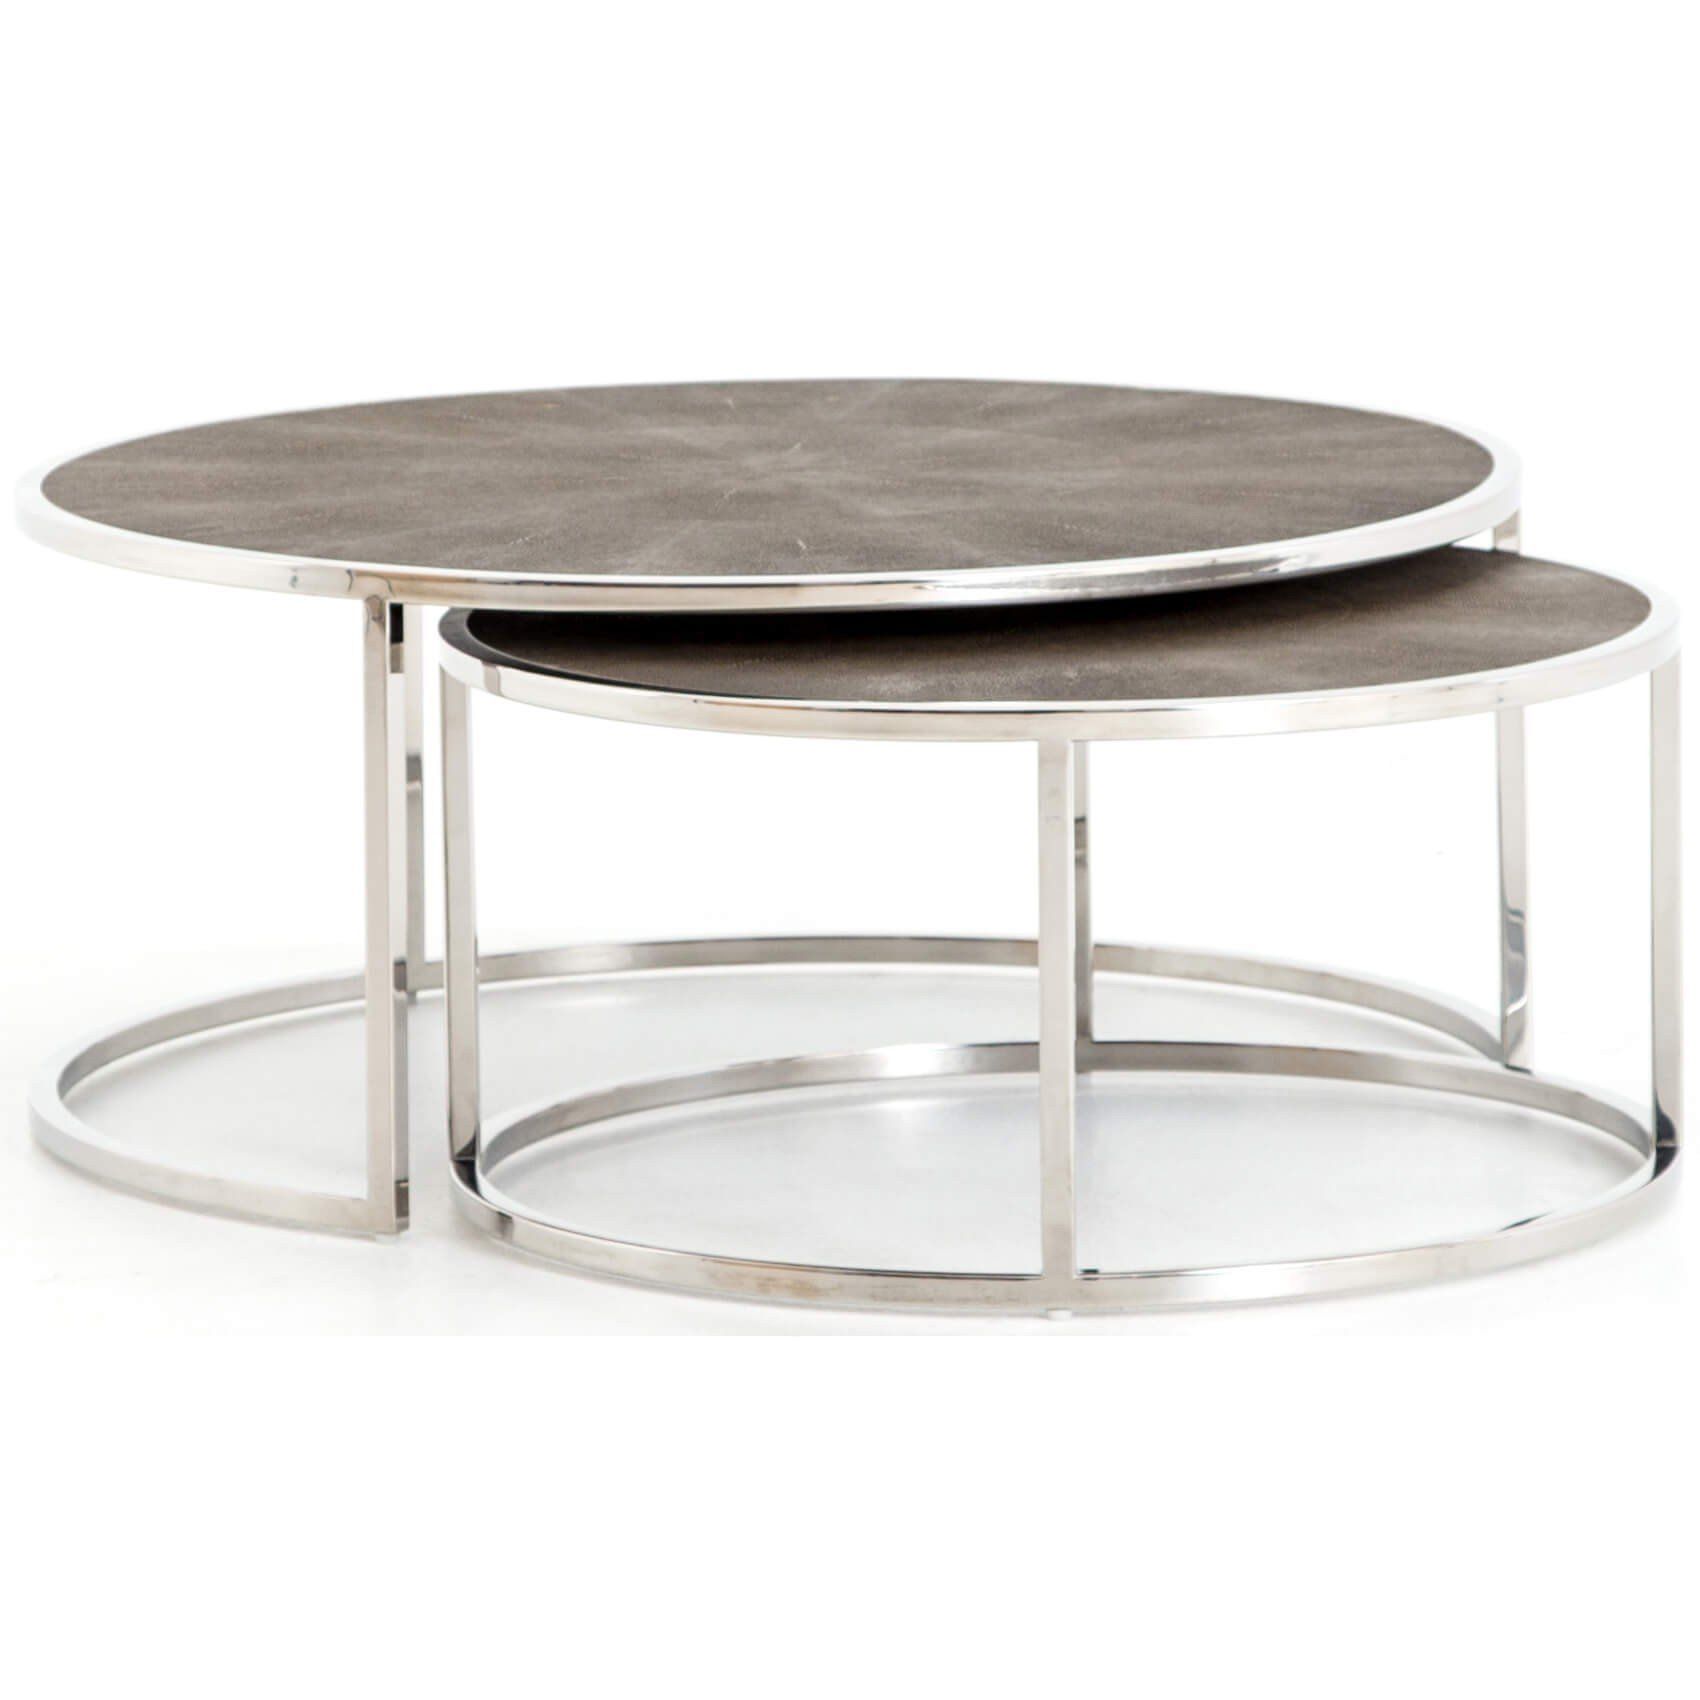 Shagreen Nesting Coffee Table, Stainless Steel | Stainless Intended For Silver Stainless Steel Coffee Tables (View 3 of 15)